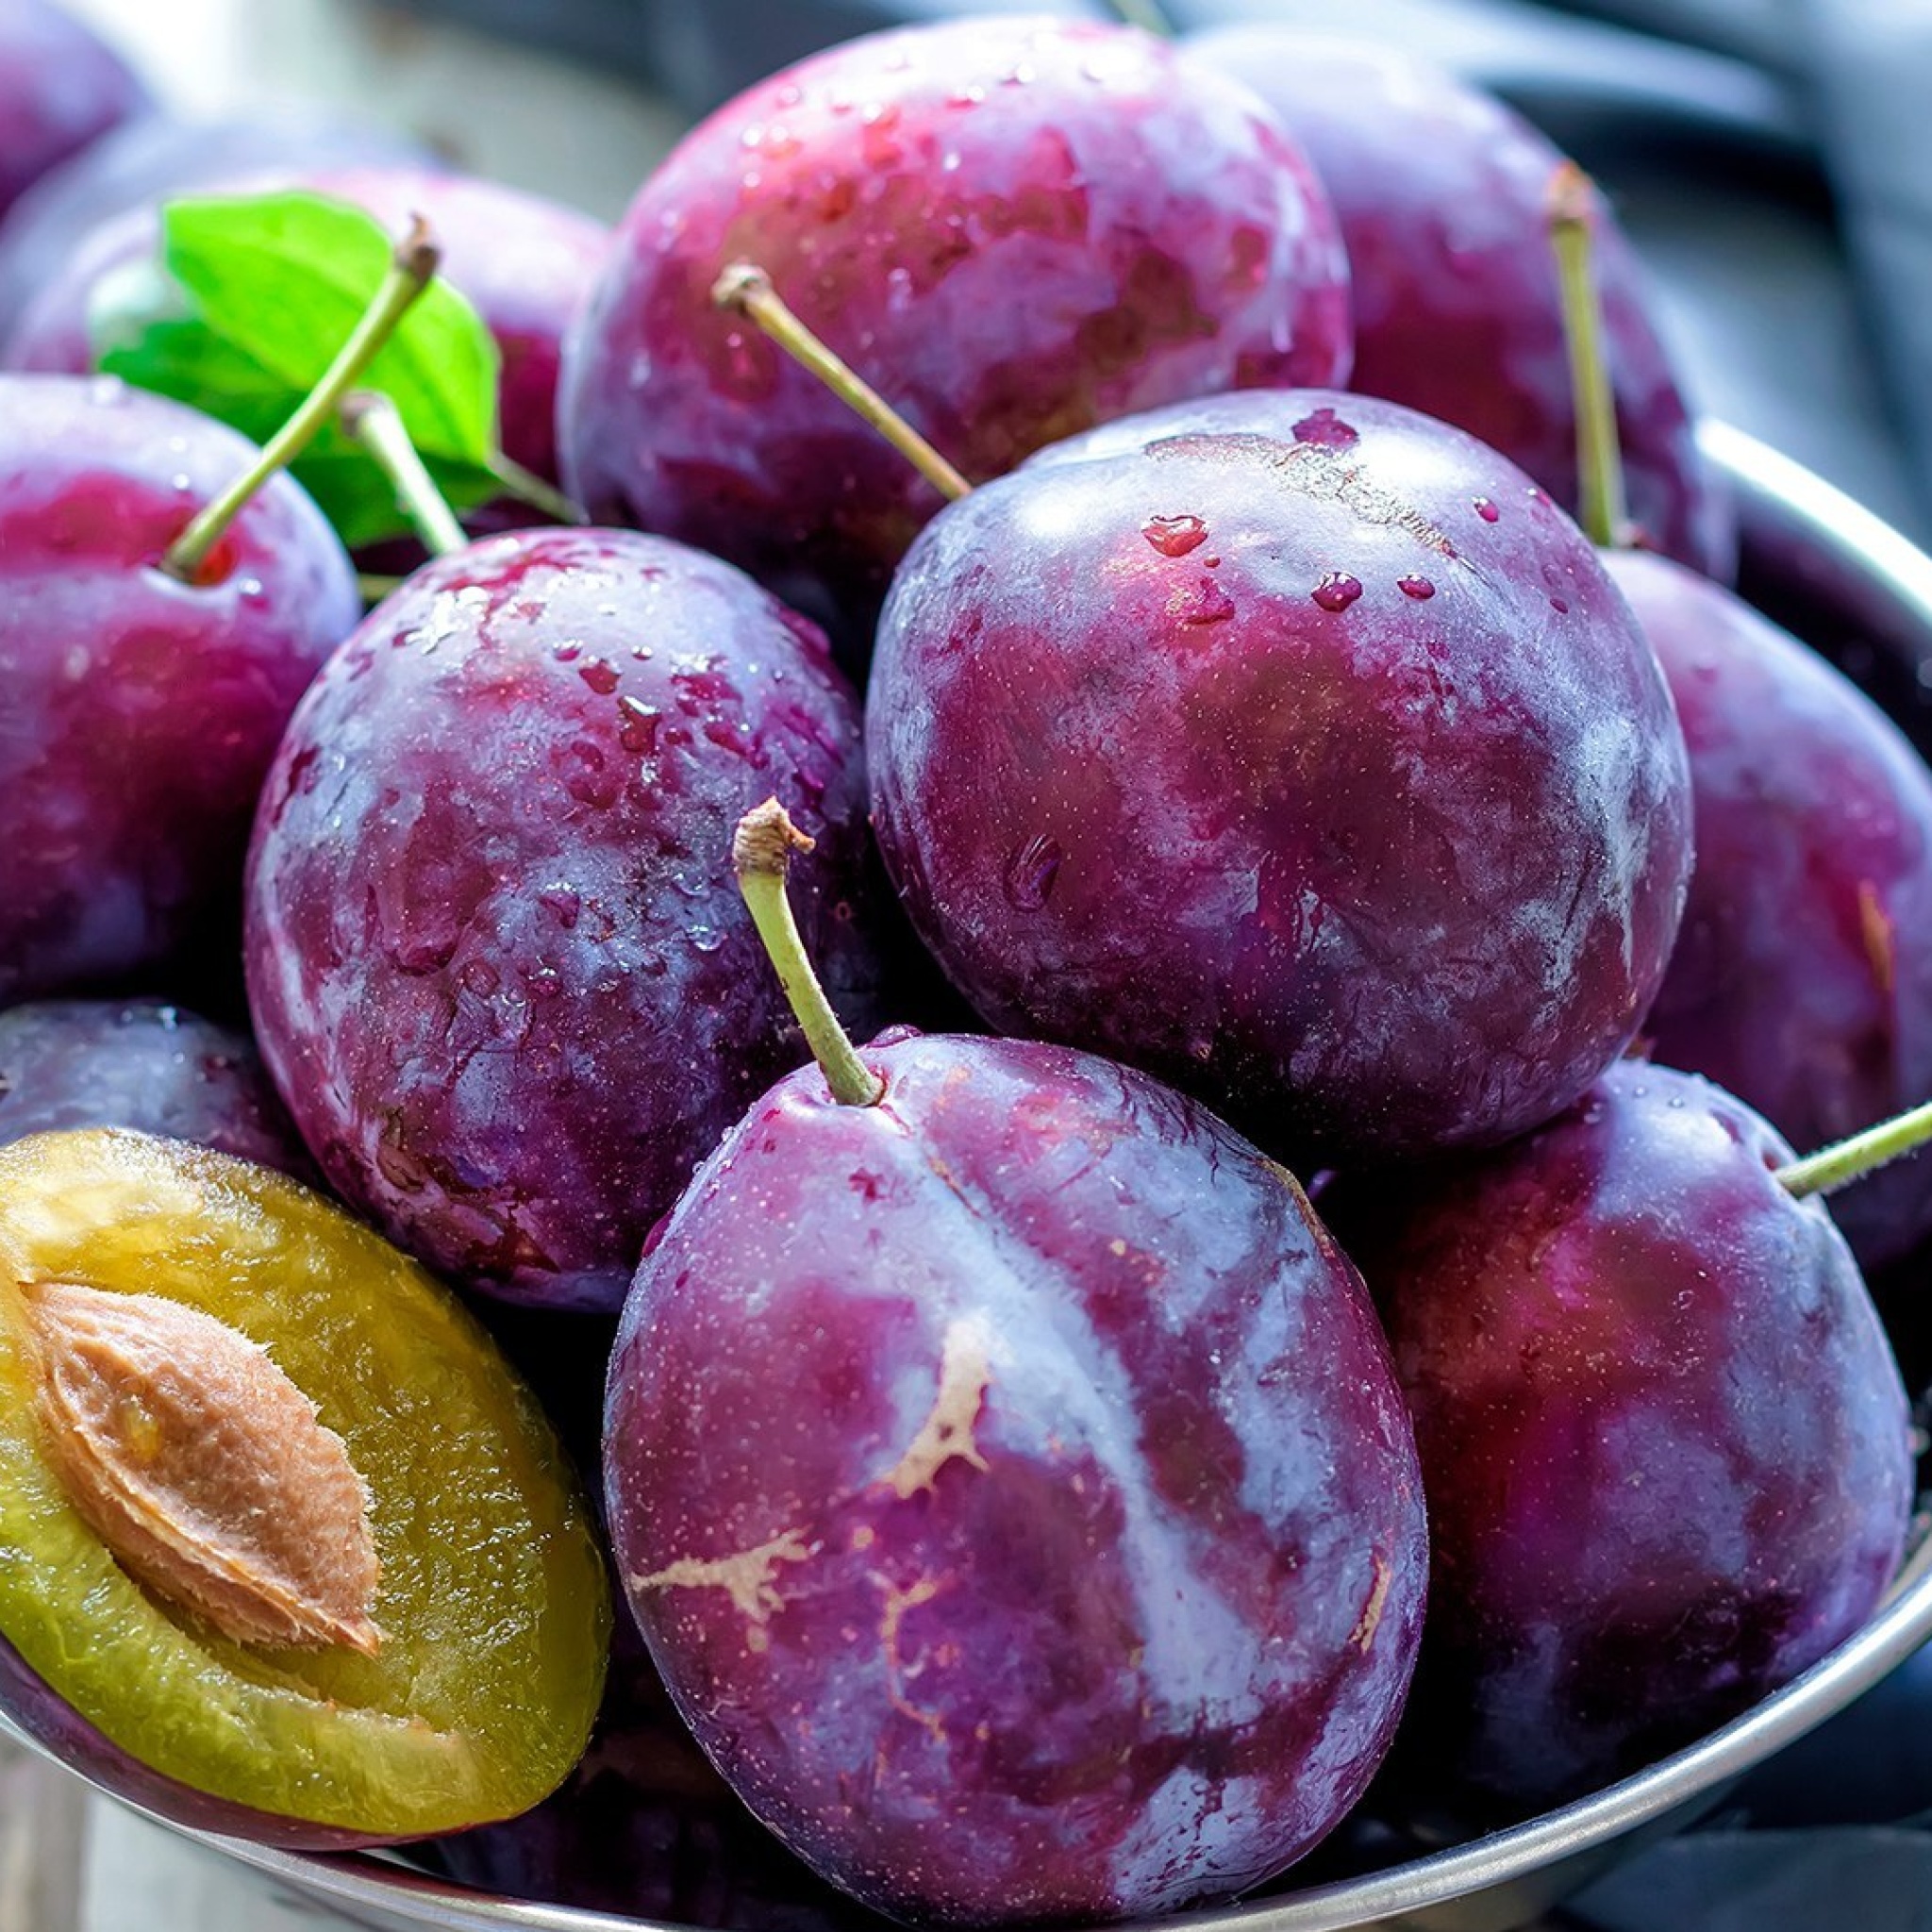 Das Plums with Vitamins Wallpaper 2048x2048